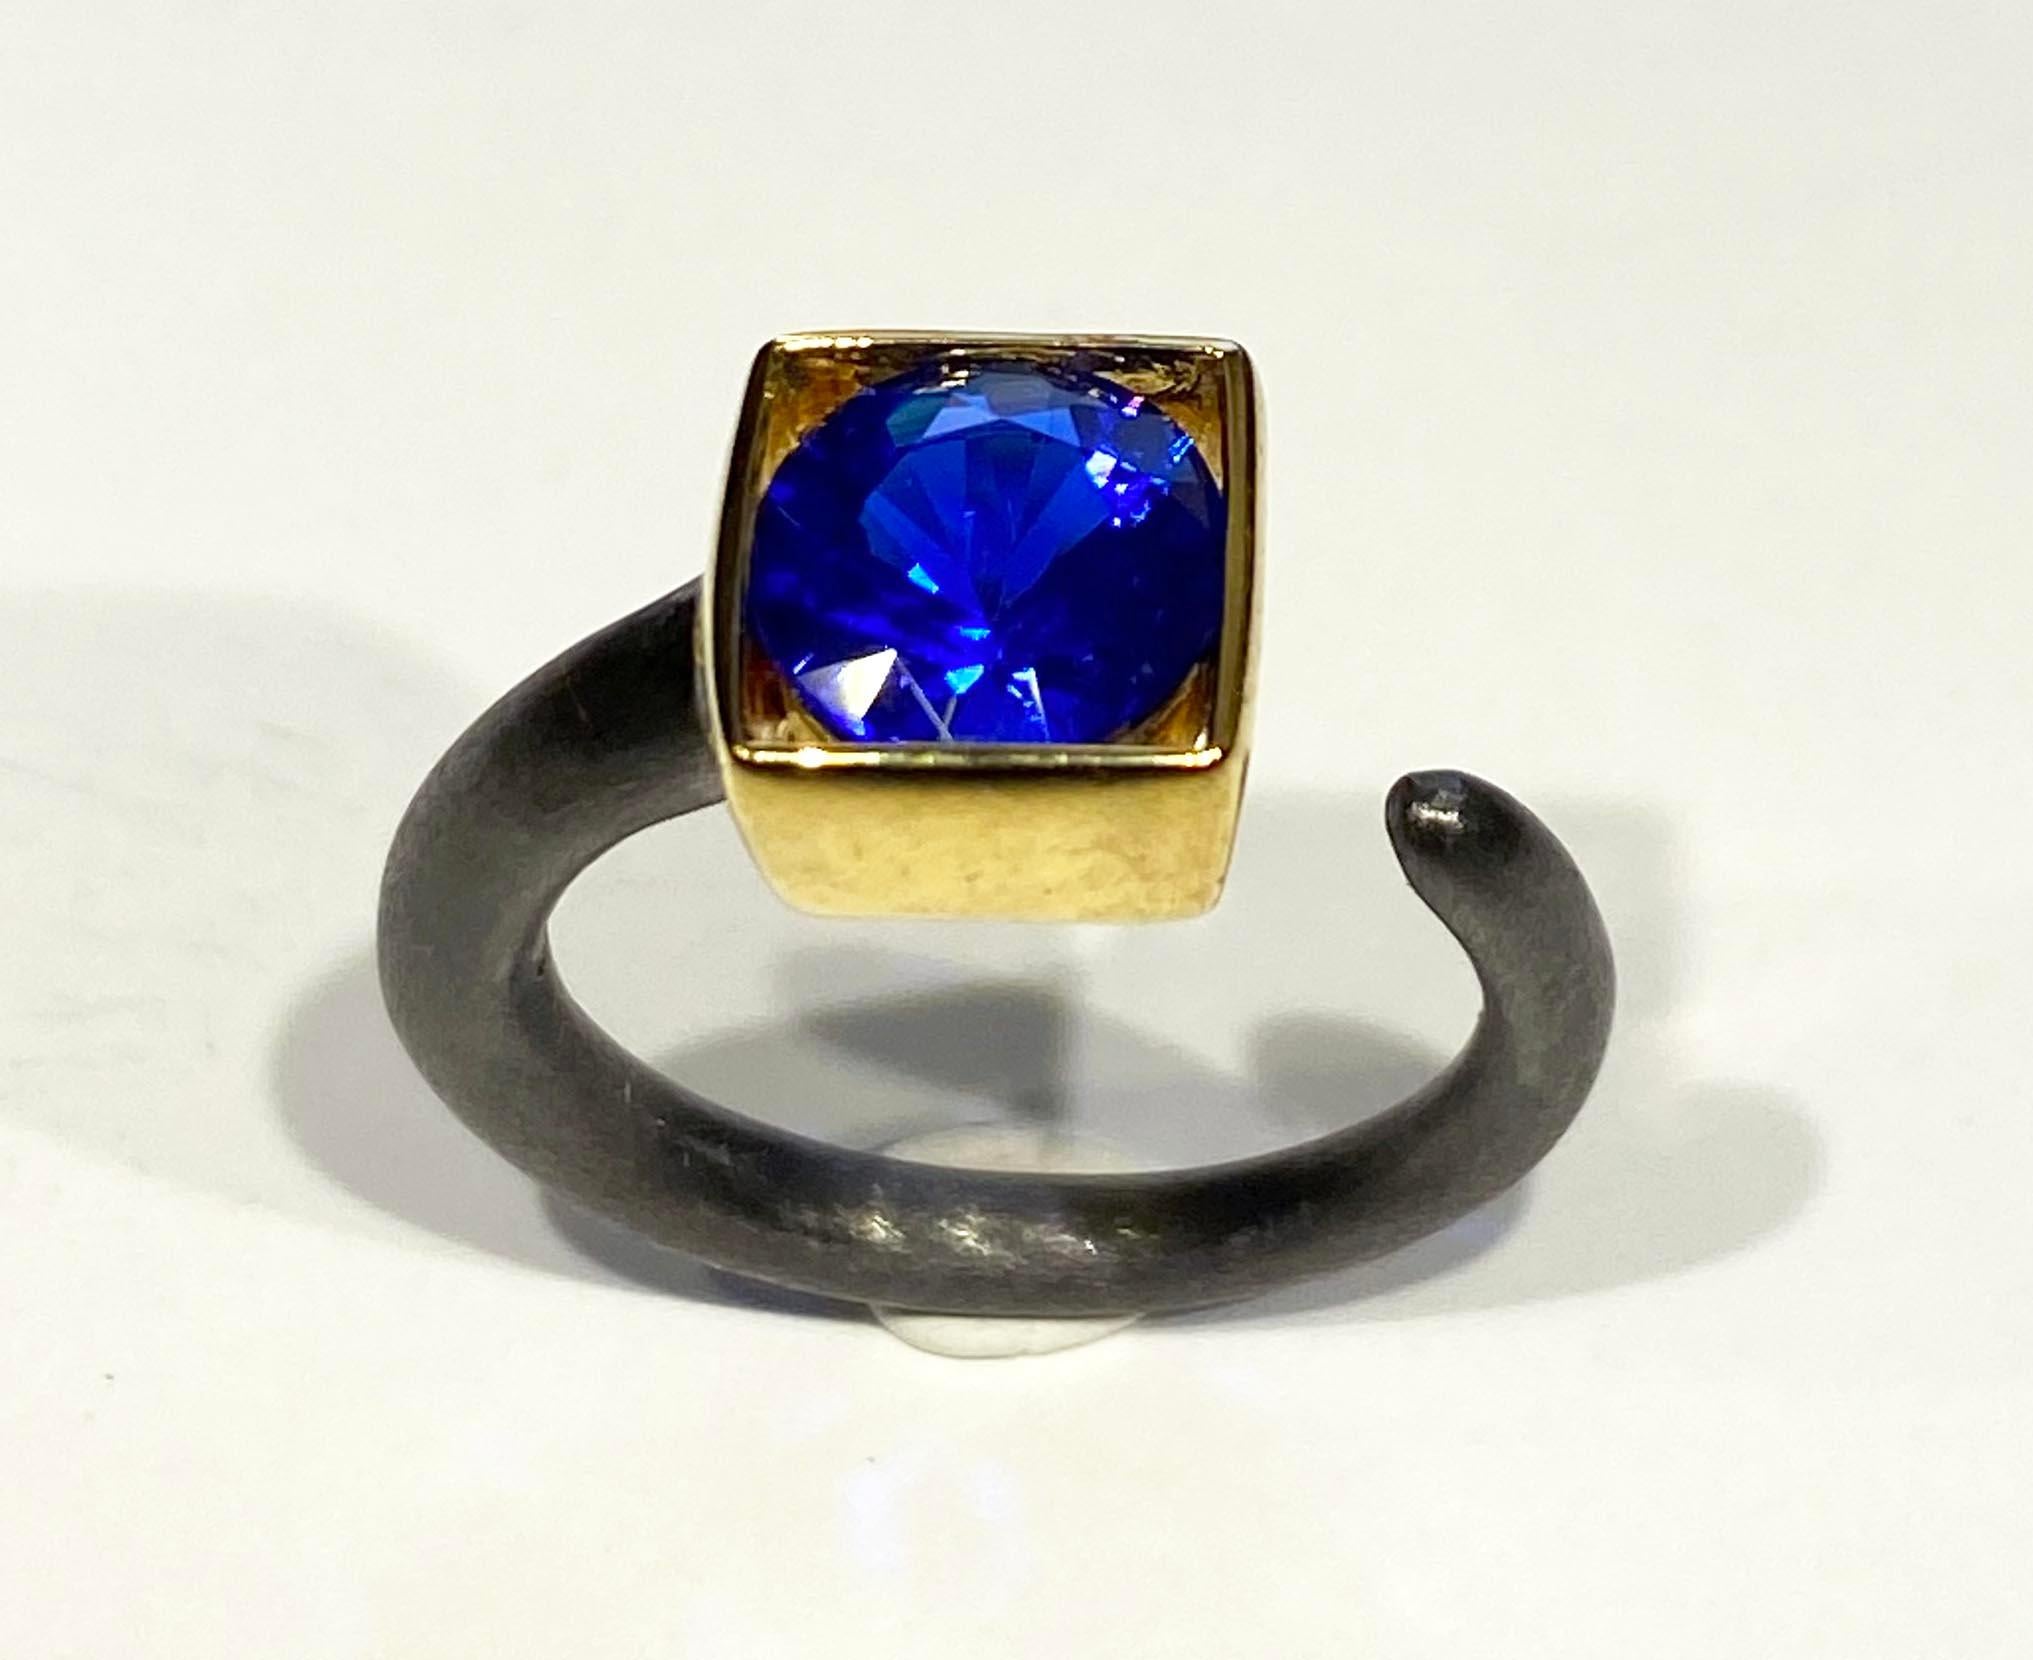 Gold Plated Blackened Silver Ring with YAG Blue Garnet. 
This Curl style Blackened Silver and Gold Plated Ring features a Box Set Vivid Blue Yittrium Aluminum Garnet of 1.6 Carats 8MM Round. The ring is Sized at 6.5 US.

Originally from San Diego,